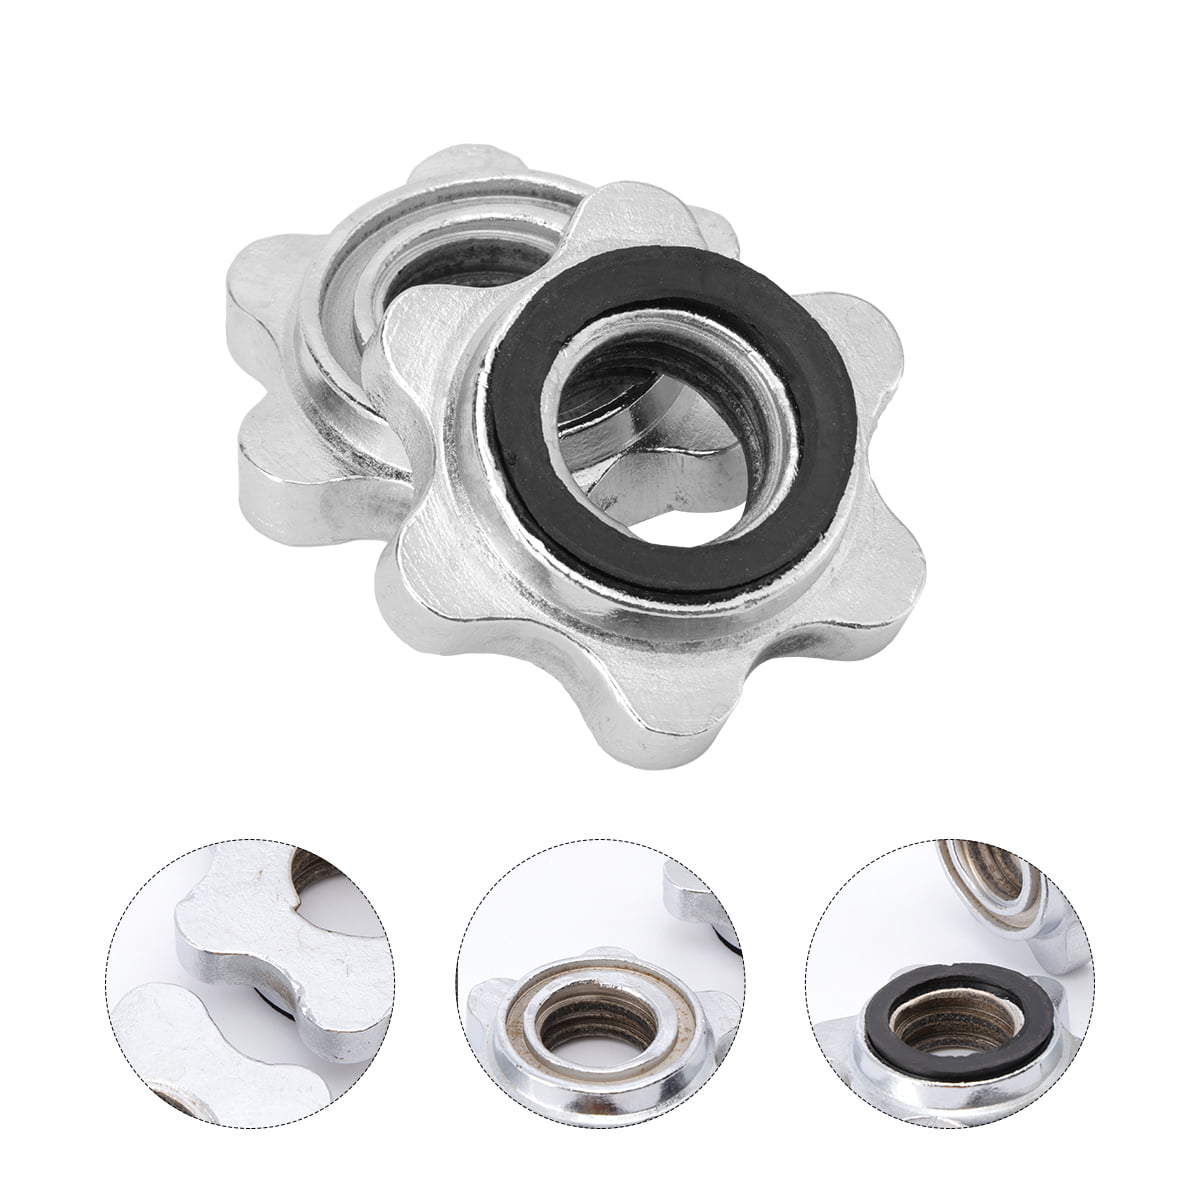 2PCS 2.5cm Iron Hex Nut Spin-Lock Collar Screw Replacement for Dumbell Barbell